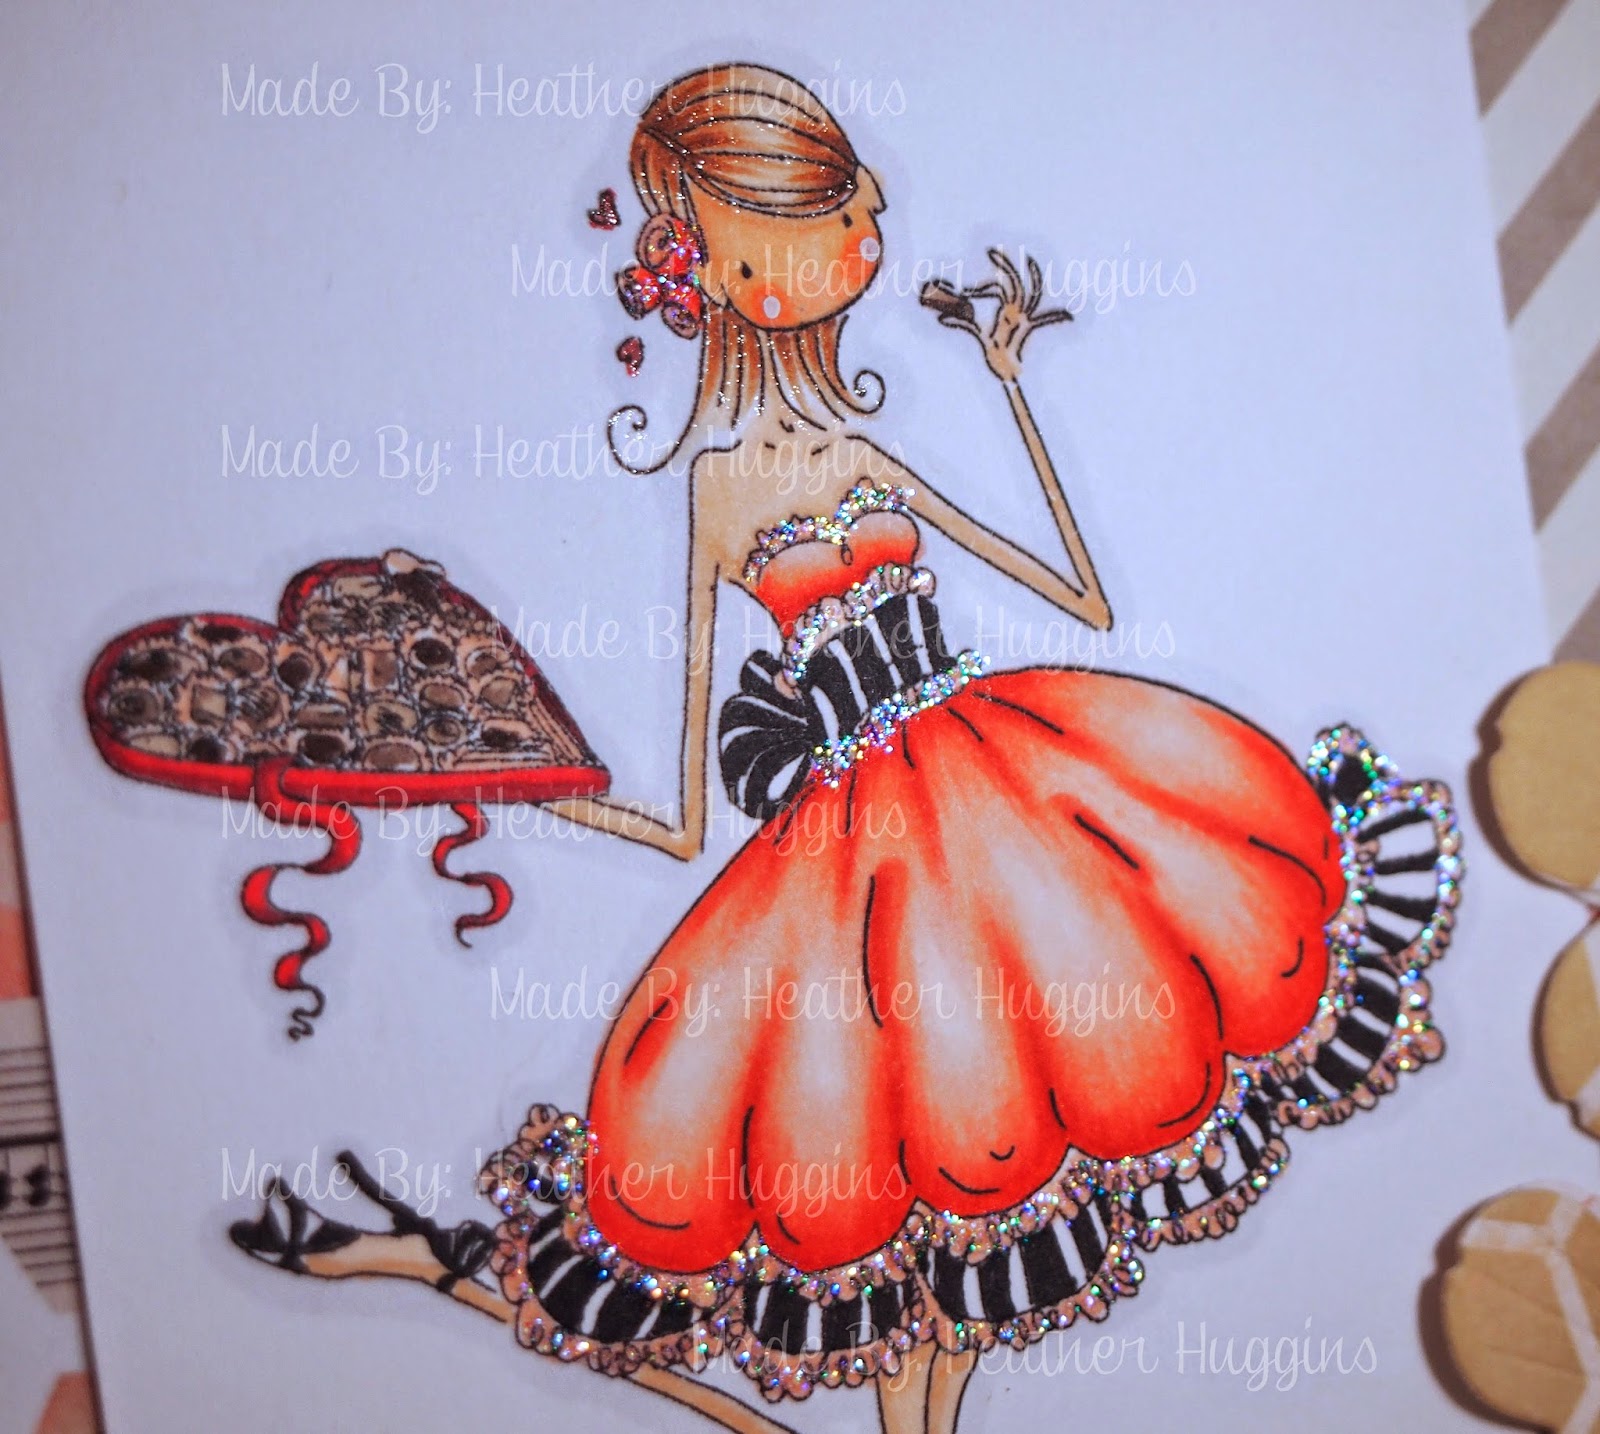 Heather's Hobbie Haven - Catherine Nibbling Chocolate Card Kit